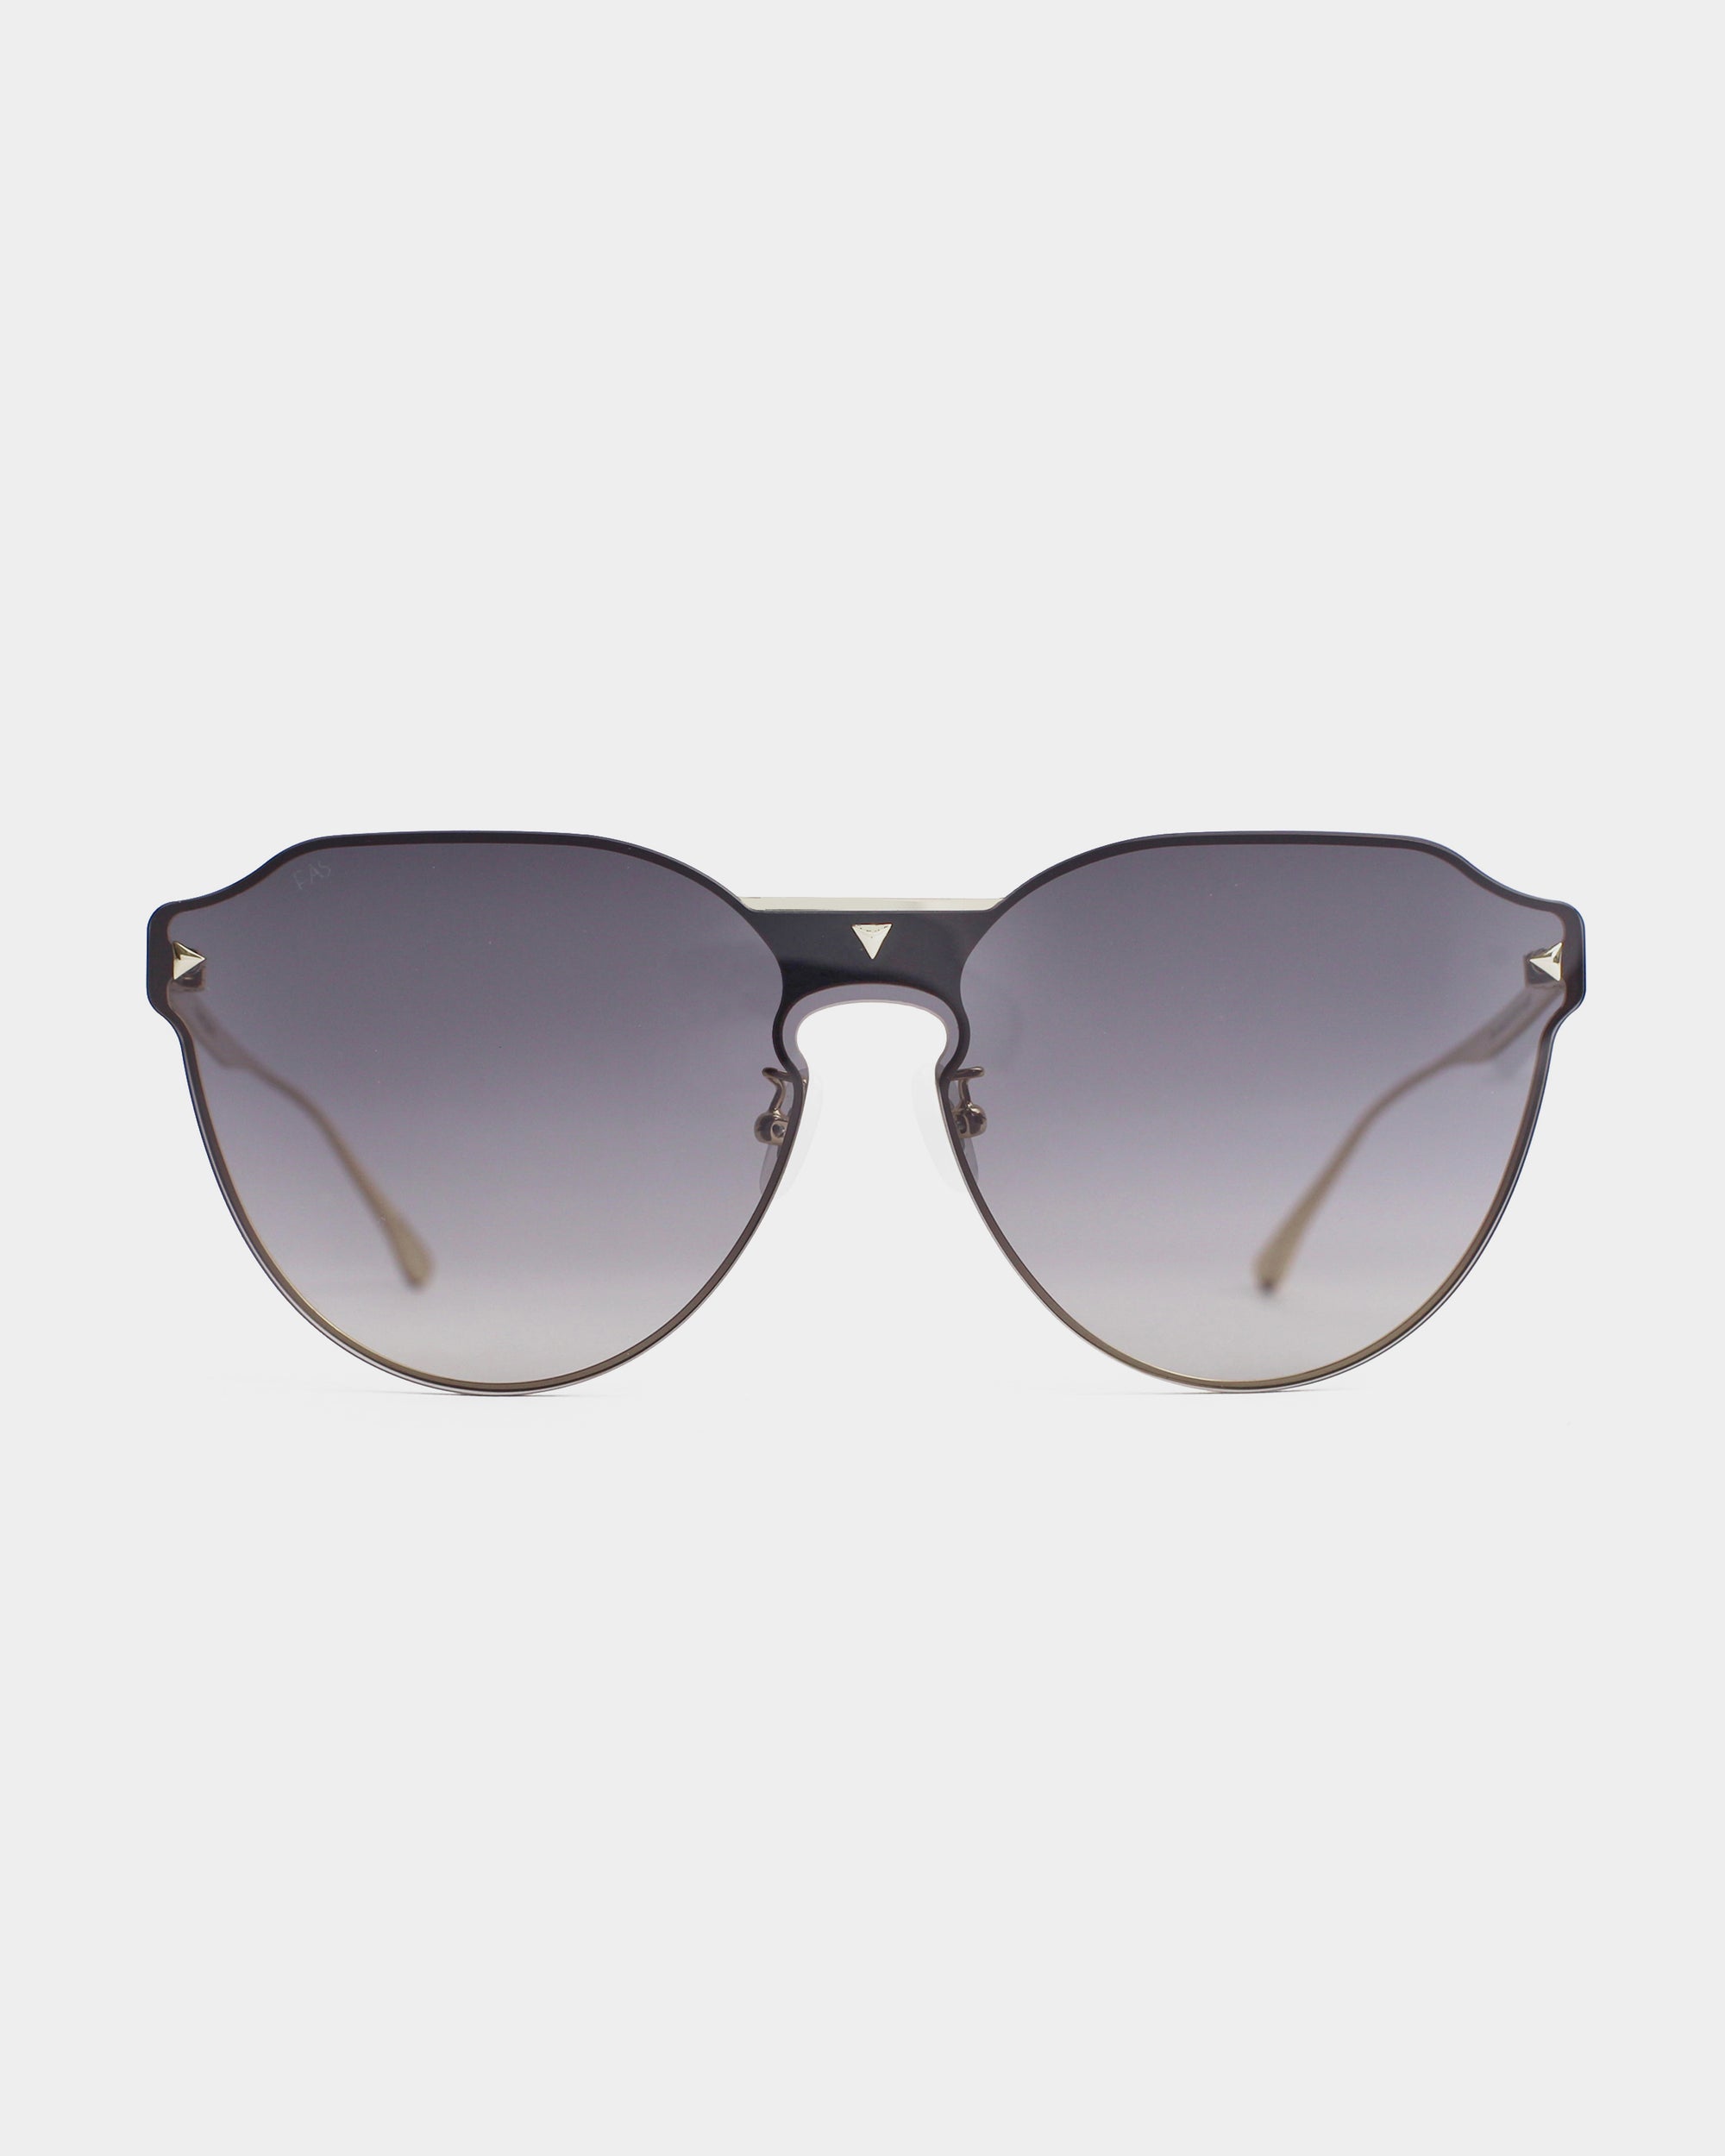 A pair of stylish For Art&#39;s Sake® Error 404 sunglasses with a black frame and gradient gray-tinted nylon lenses, offering UV protection. The design includes small metallic triangular details on the upper corners of the lenses. The sunglasses have thin, light brown arms with elegant 18-karat gold plating. The background is plain white.